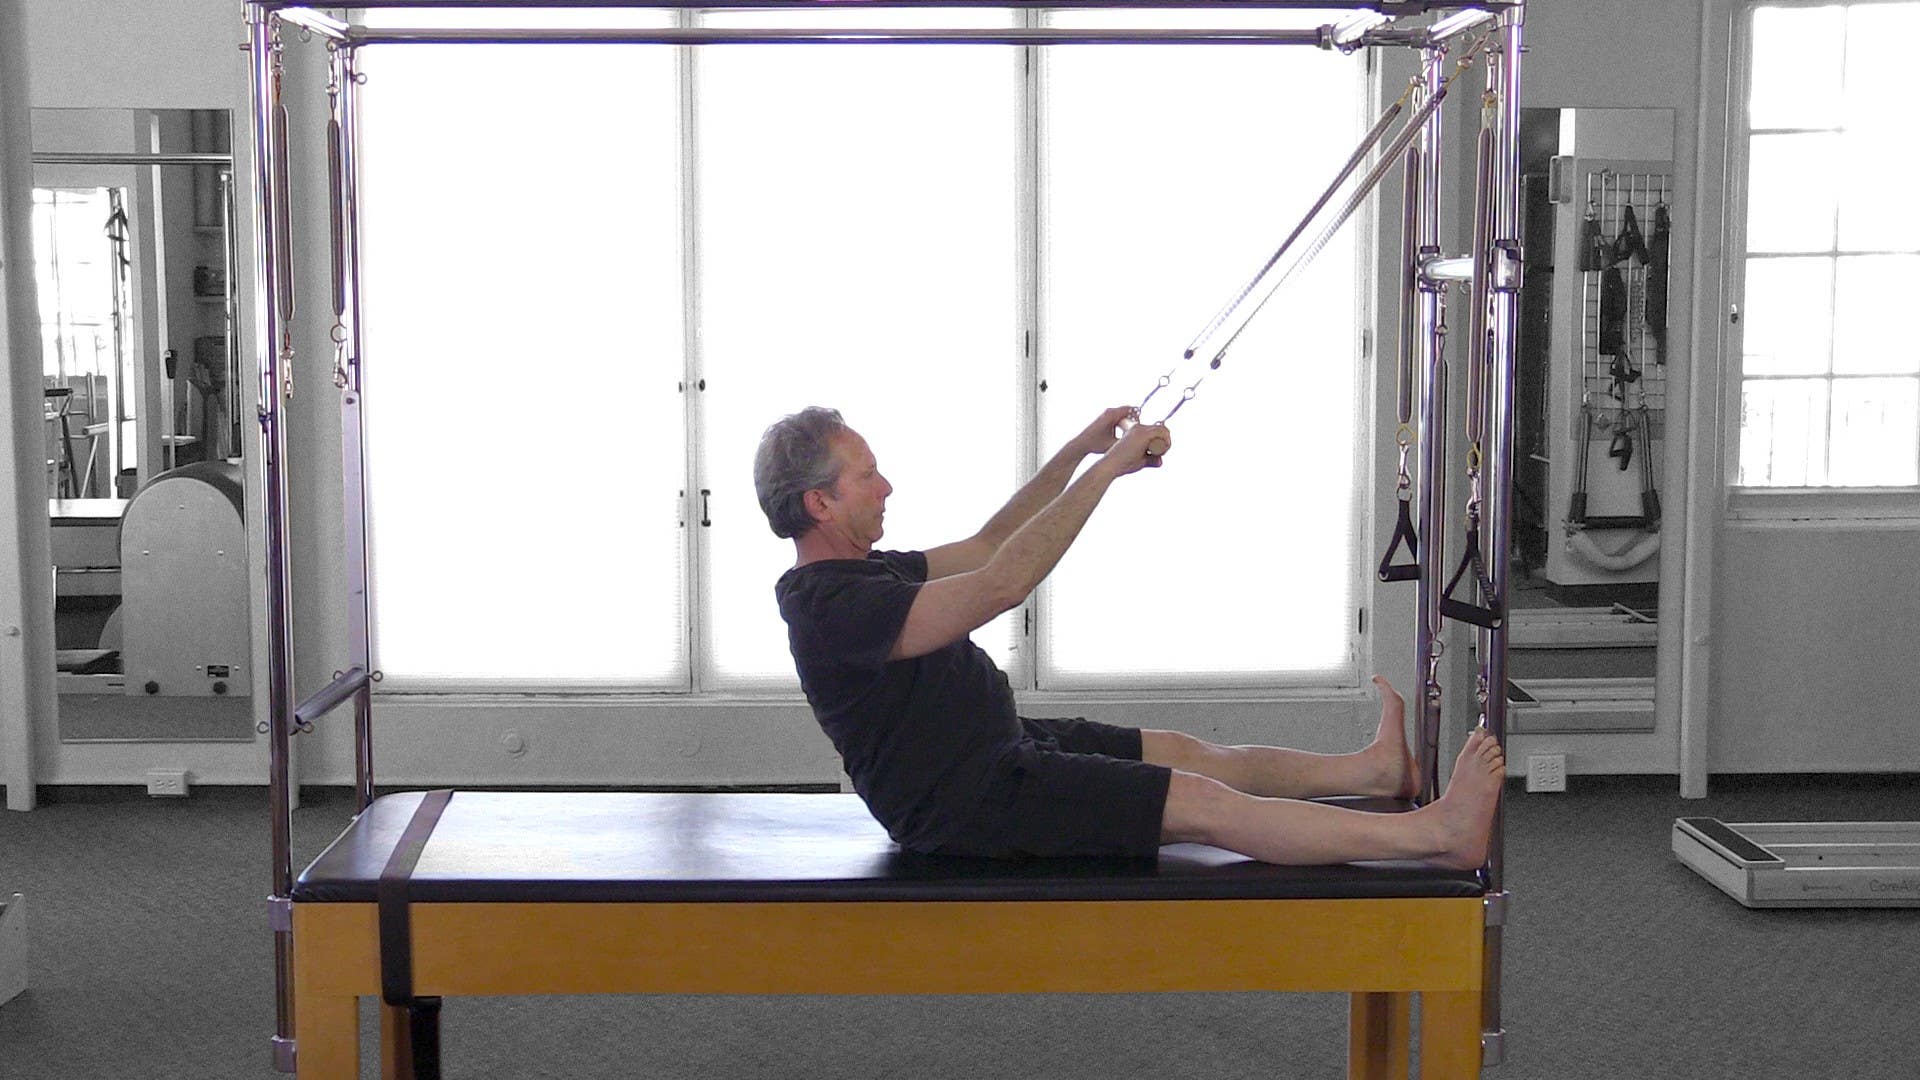 Why Pilates? -- To Stand Tall